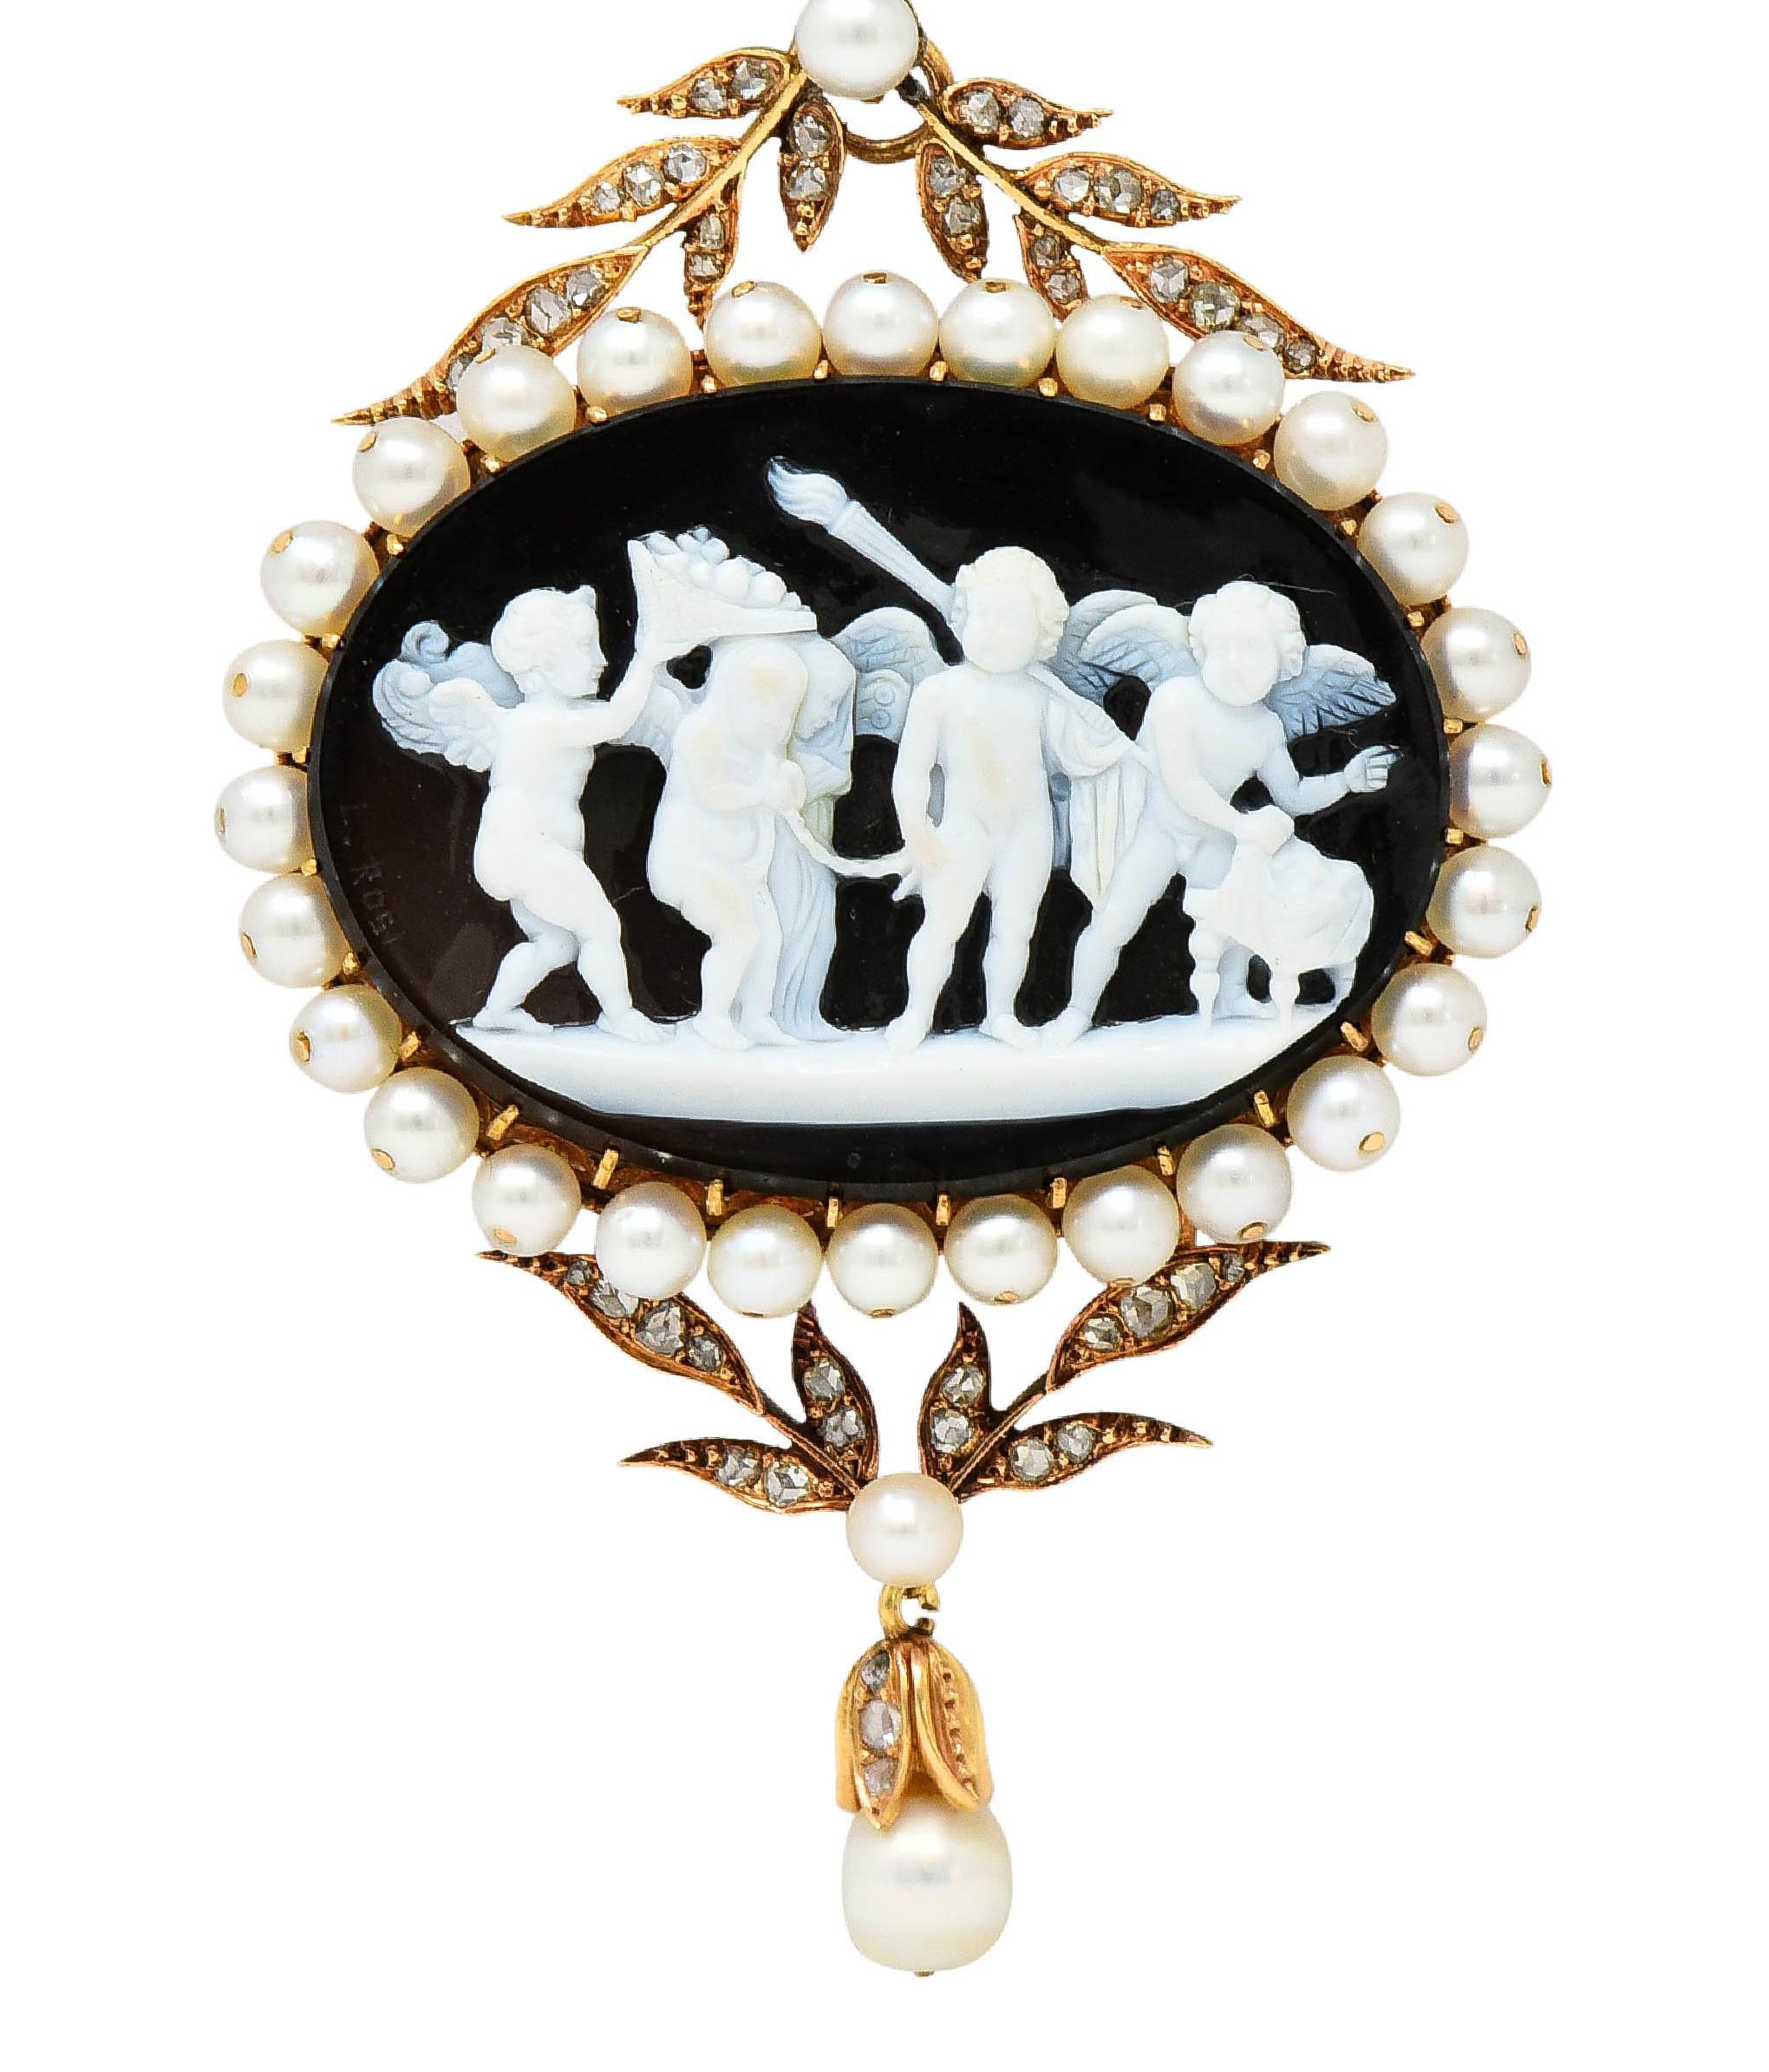 Designed as an oval-shaped pendant suspended from bale with dimensional foliate motif surrounds and drop
Featuring an oval-shaped plaque of agate measuring 29.0 x 40.0 mm carved with detailed cameo
Depicting a Marlborough Gem carving of the marriage